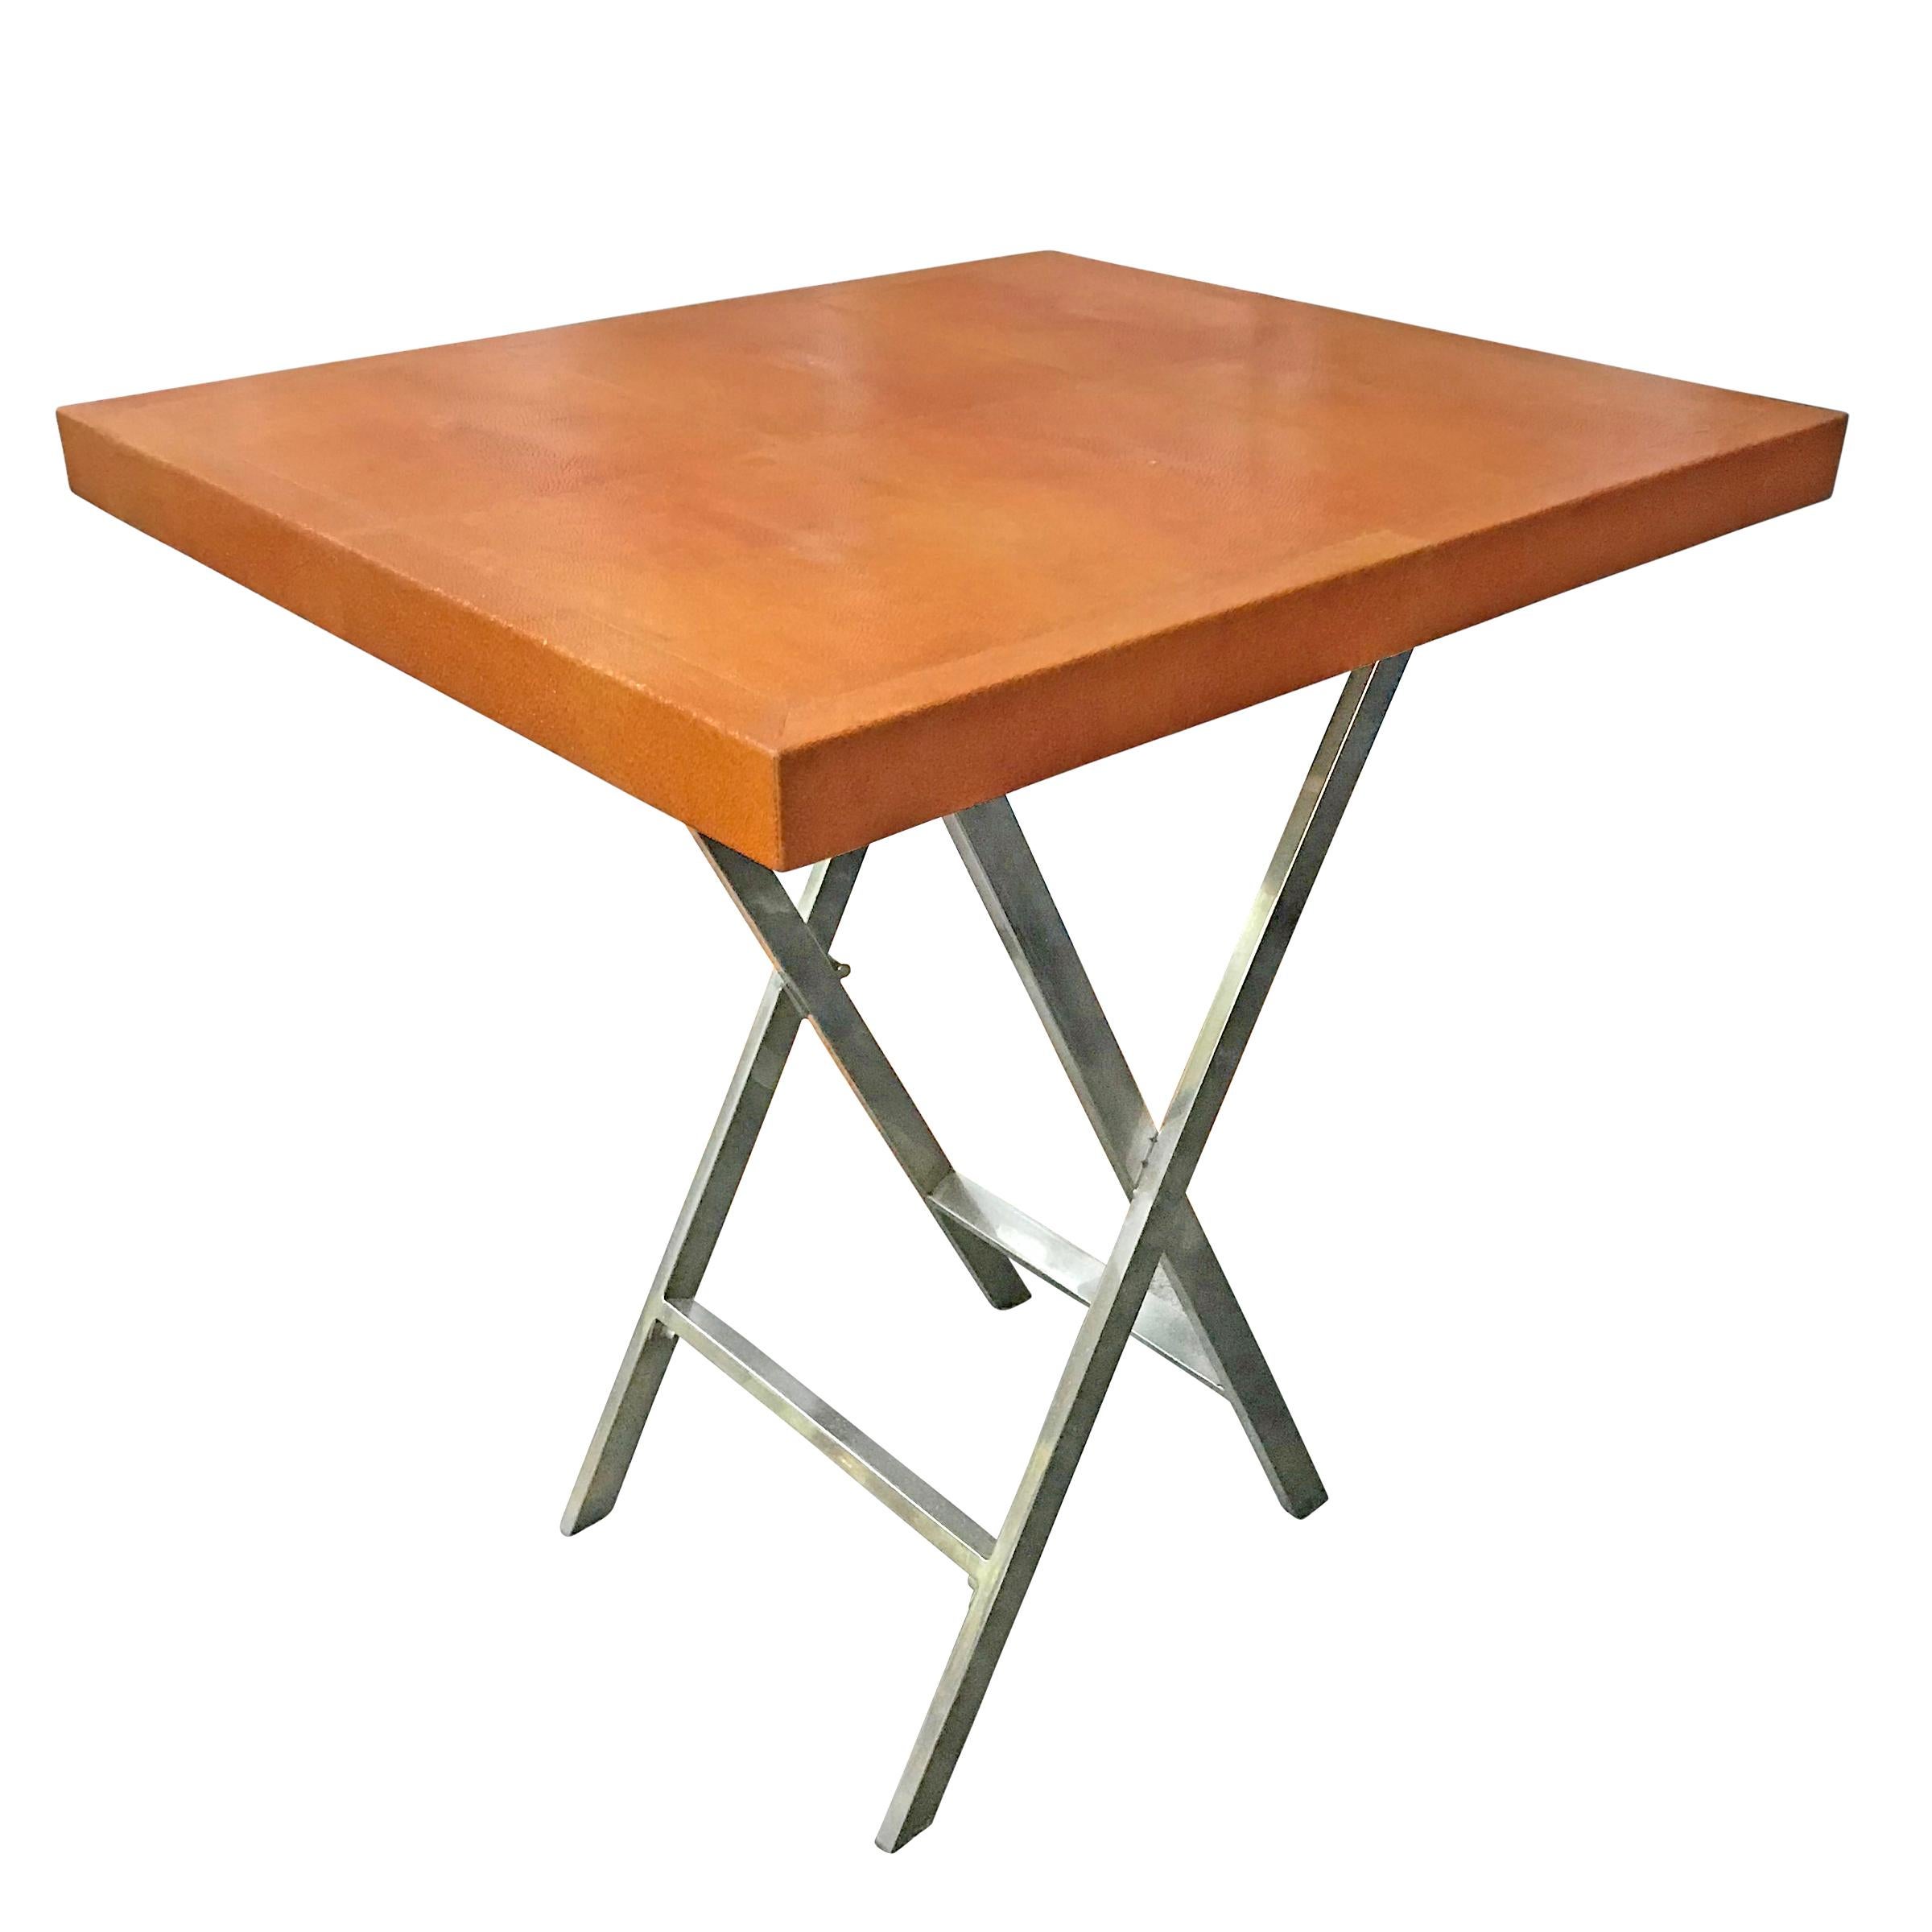 A late 20th century American side table with an orange shagreen top, chrome x-form legs. The table appears to fold, however, it is stationary.